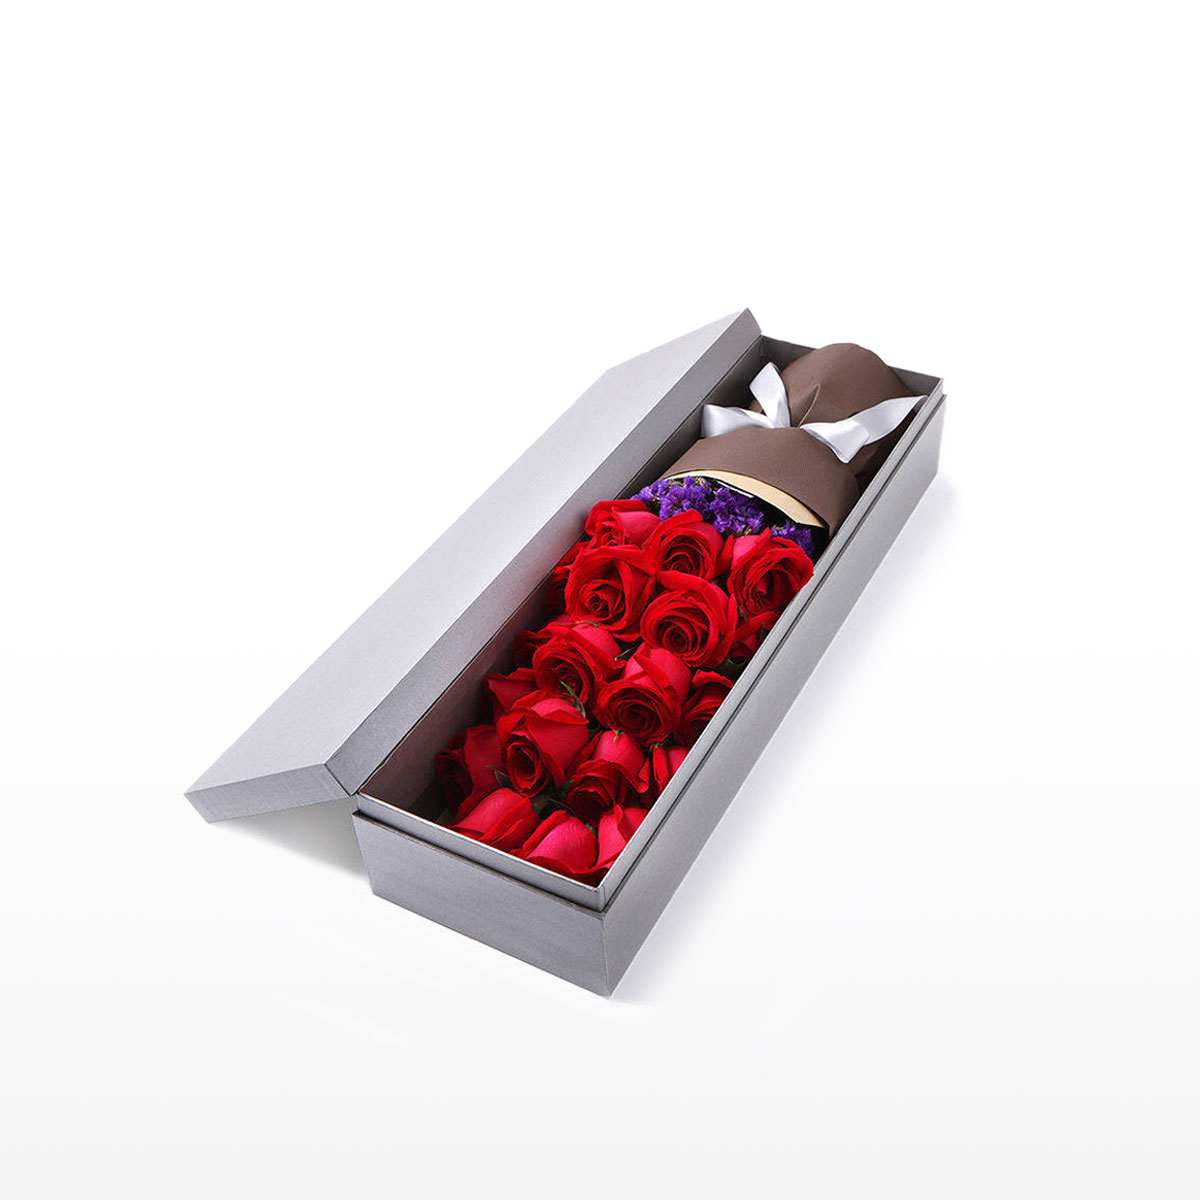 A medium bouquet of 19 red roses and purple 'forget-me-not' flowers presented in an elegant gift box